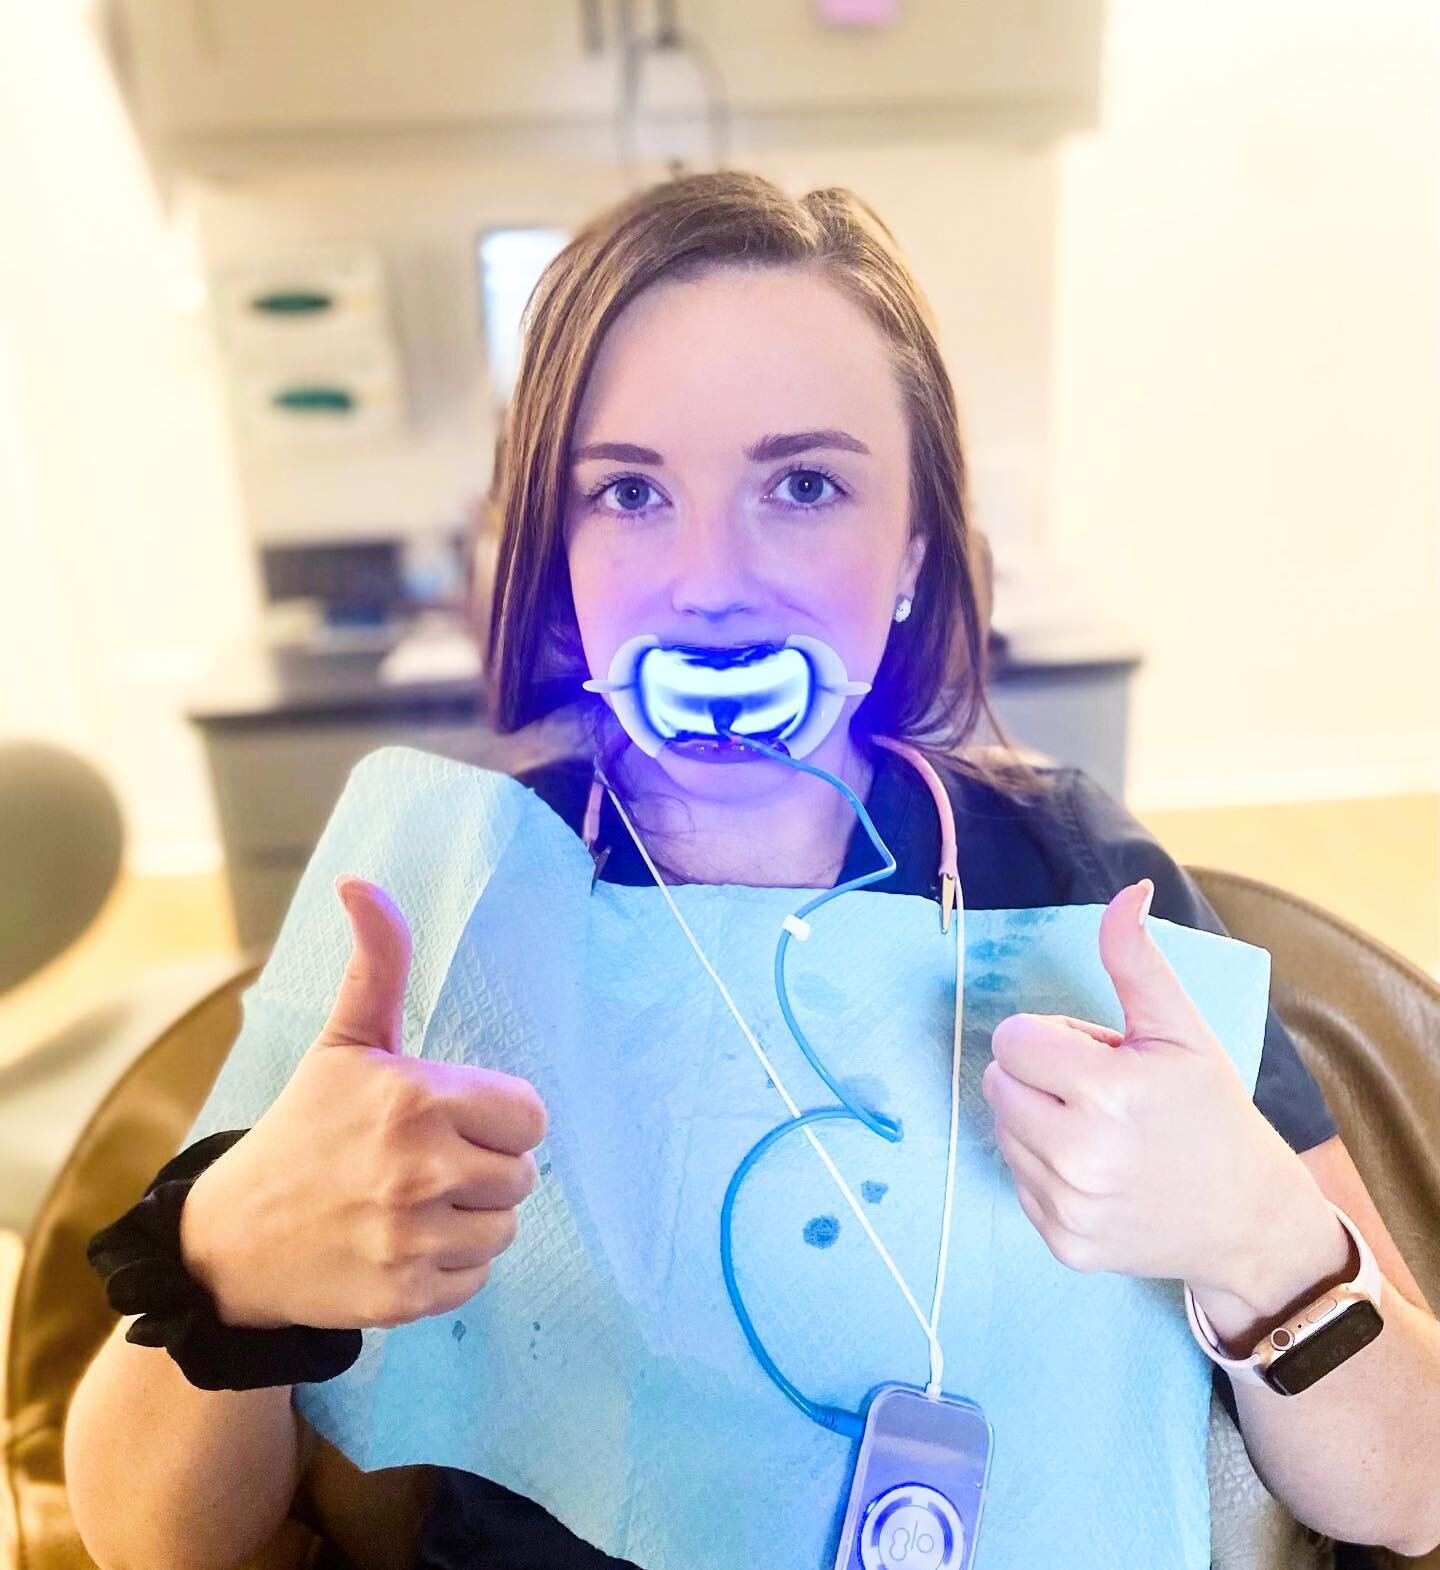 Are you dreaming of a white Christmas? Schedule yourself a quick in office teeth whitening session with our @gloscience technology. This would also make for a great last minute Christmas present!!